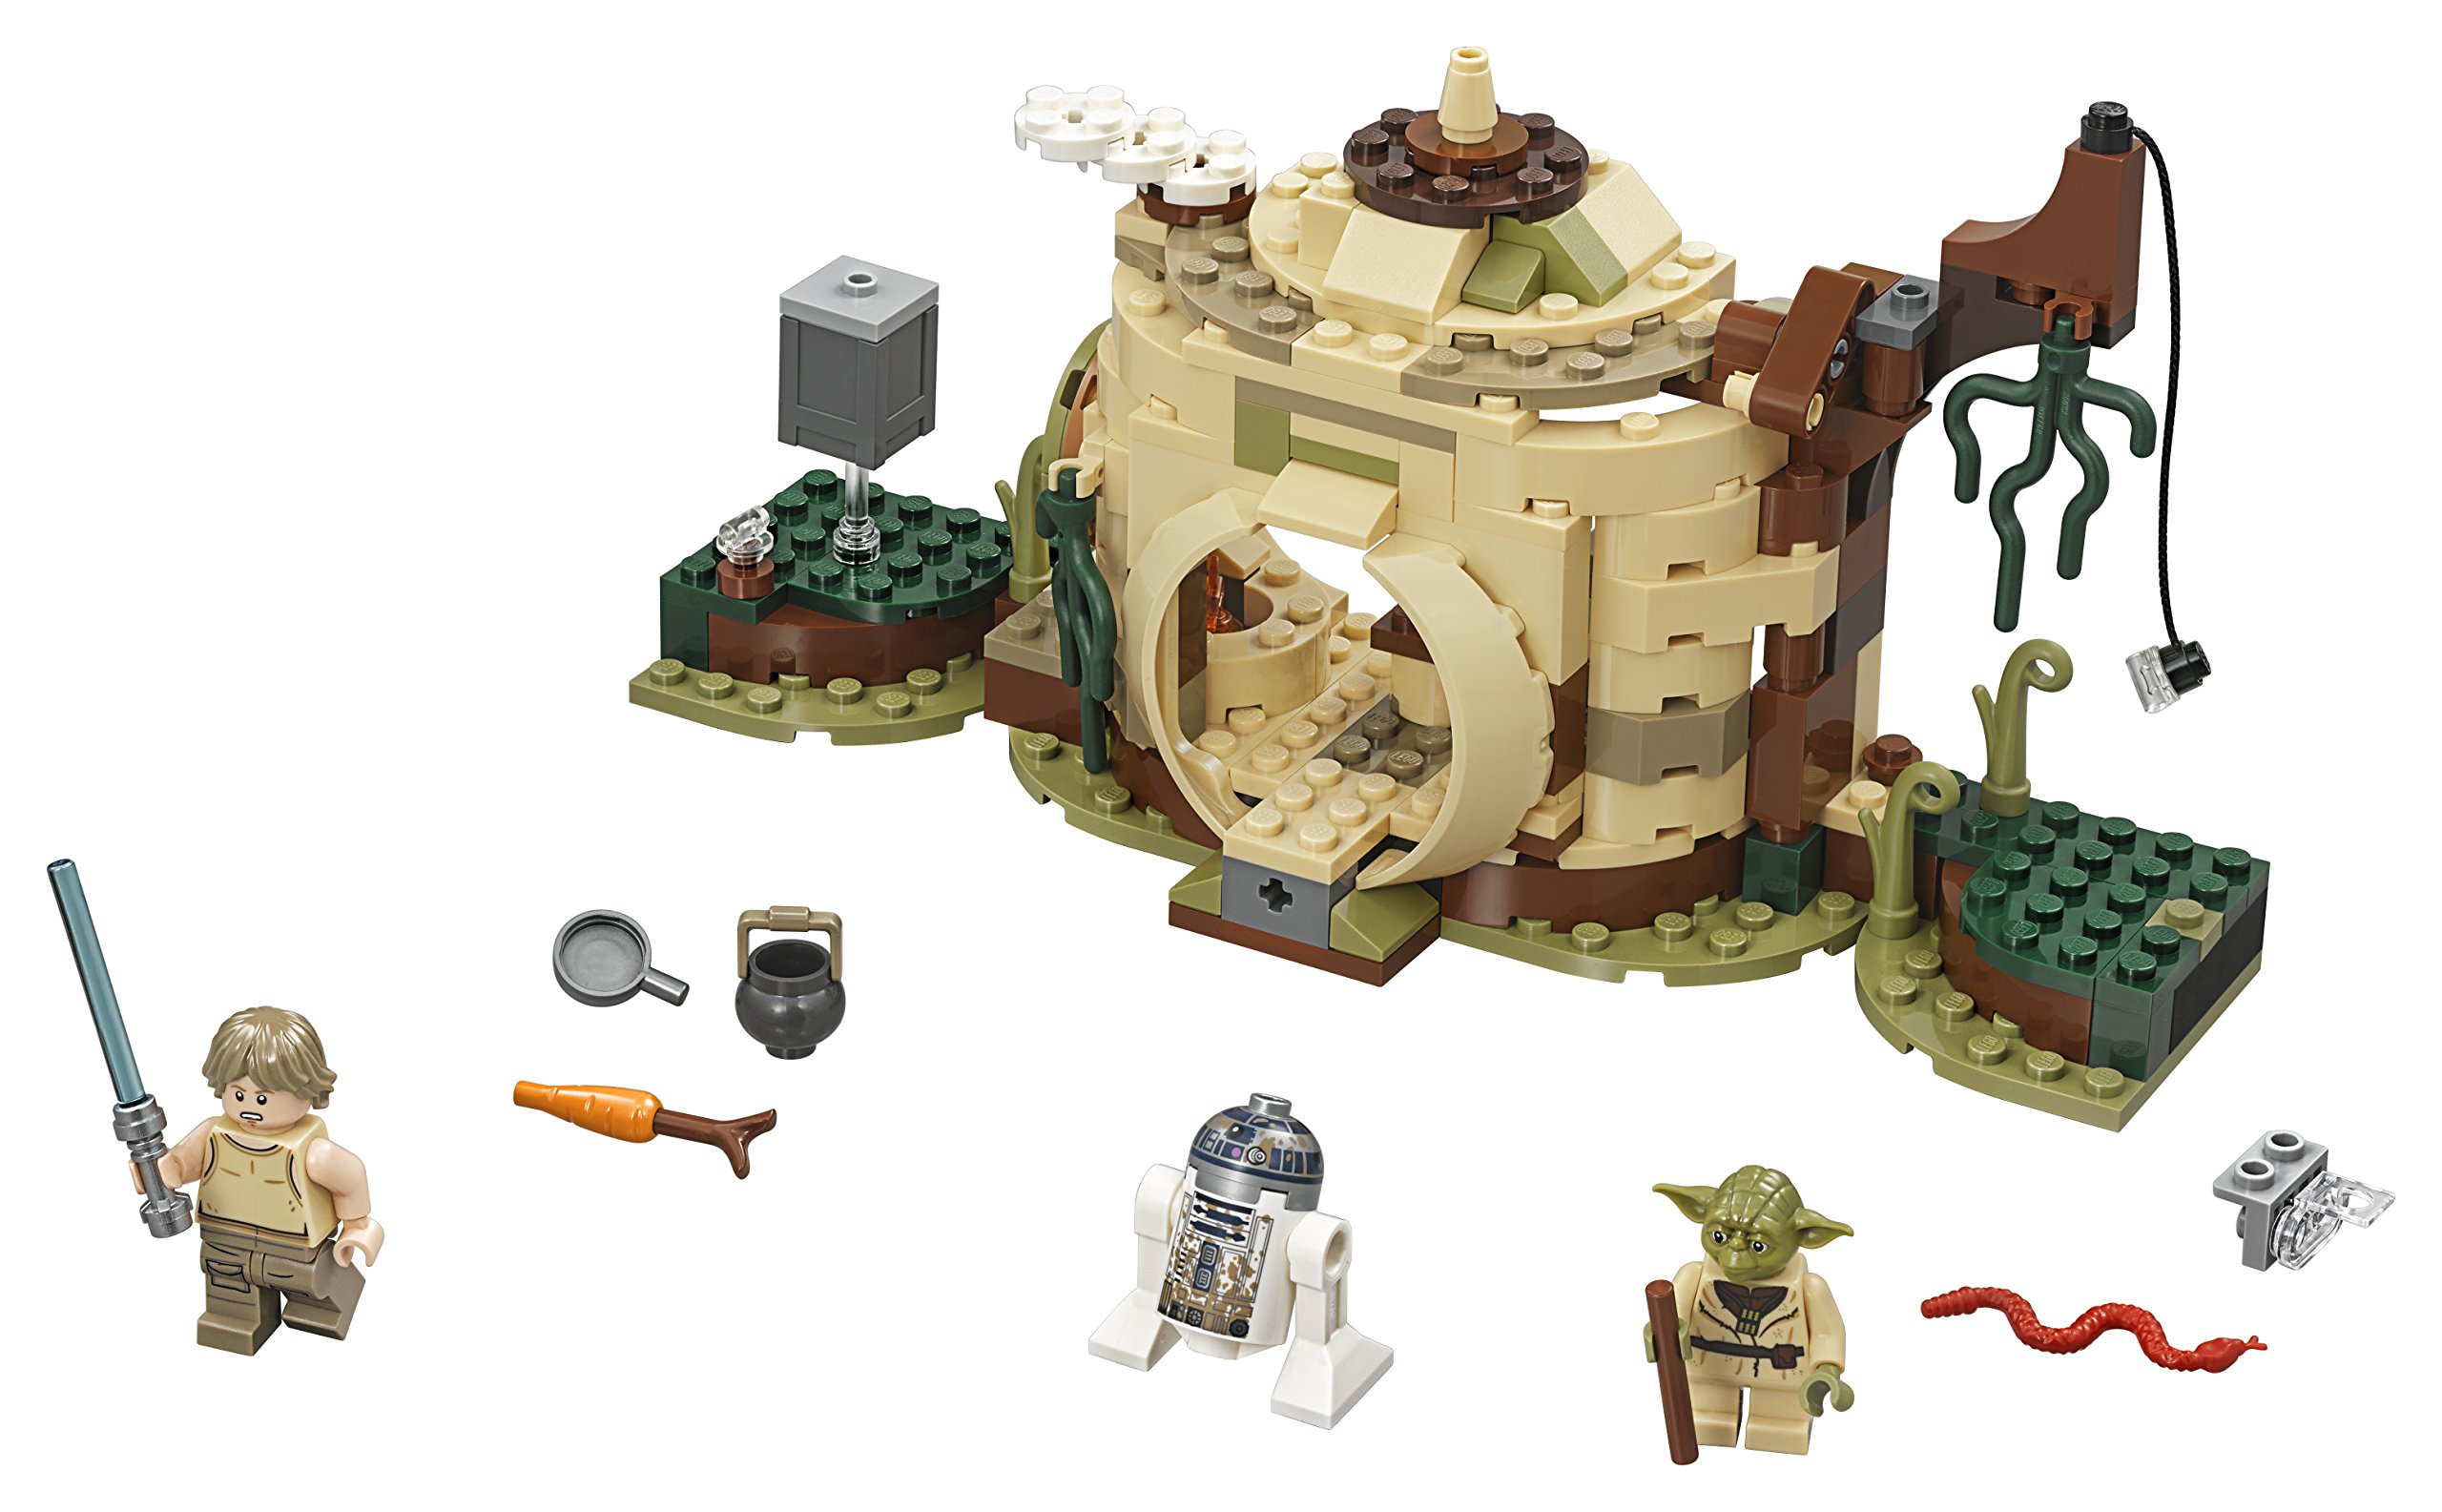 LEGO Star Wars: The Empire Strikes Back Yoda’s Hut 75208 Buildin g Kit (229 Pieces) (Discontinued by Manufacturer)